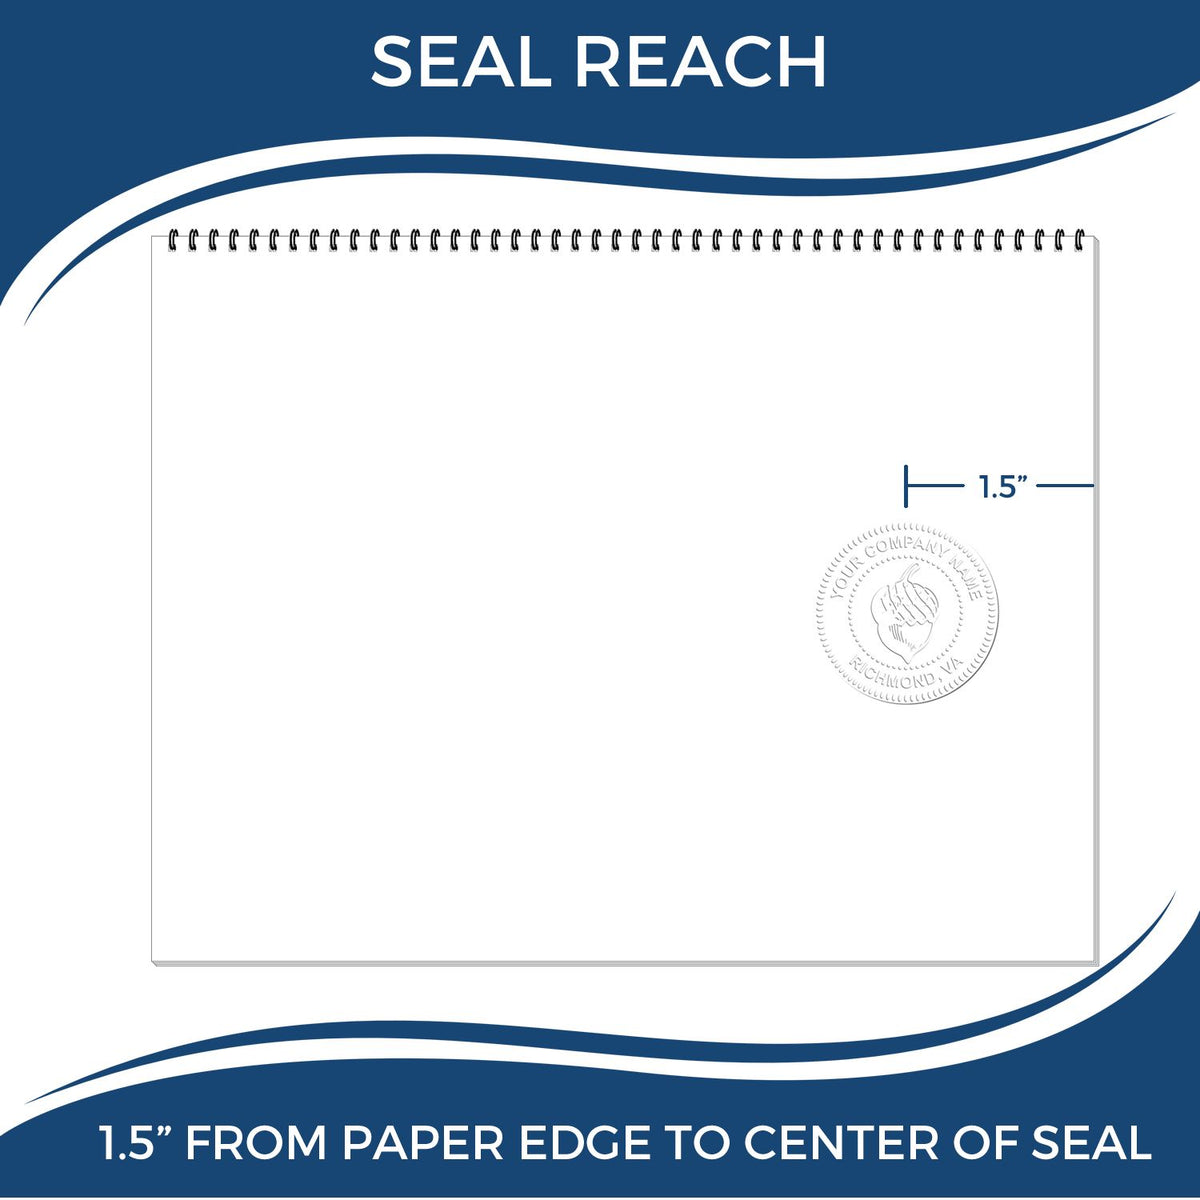 An infographic showing the seal reach which is represented by a ruler and a miniature seal image of the Hybrid Mississippi Architect Seal